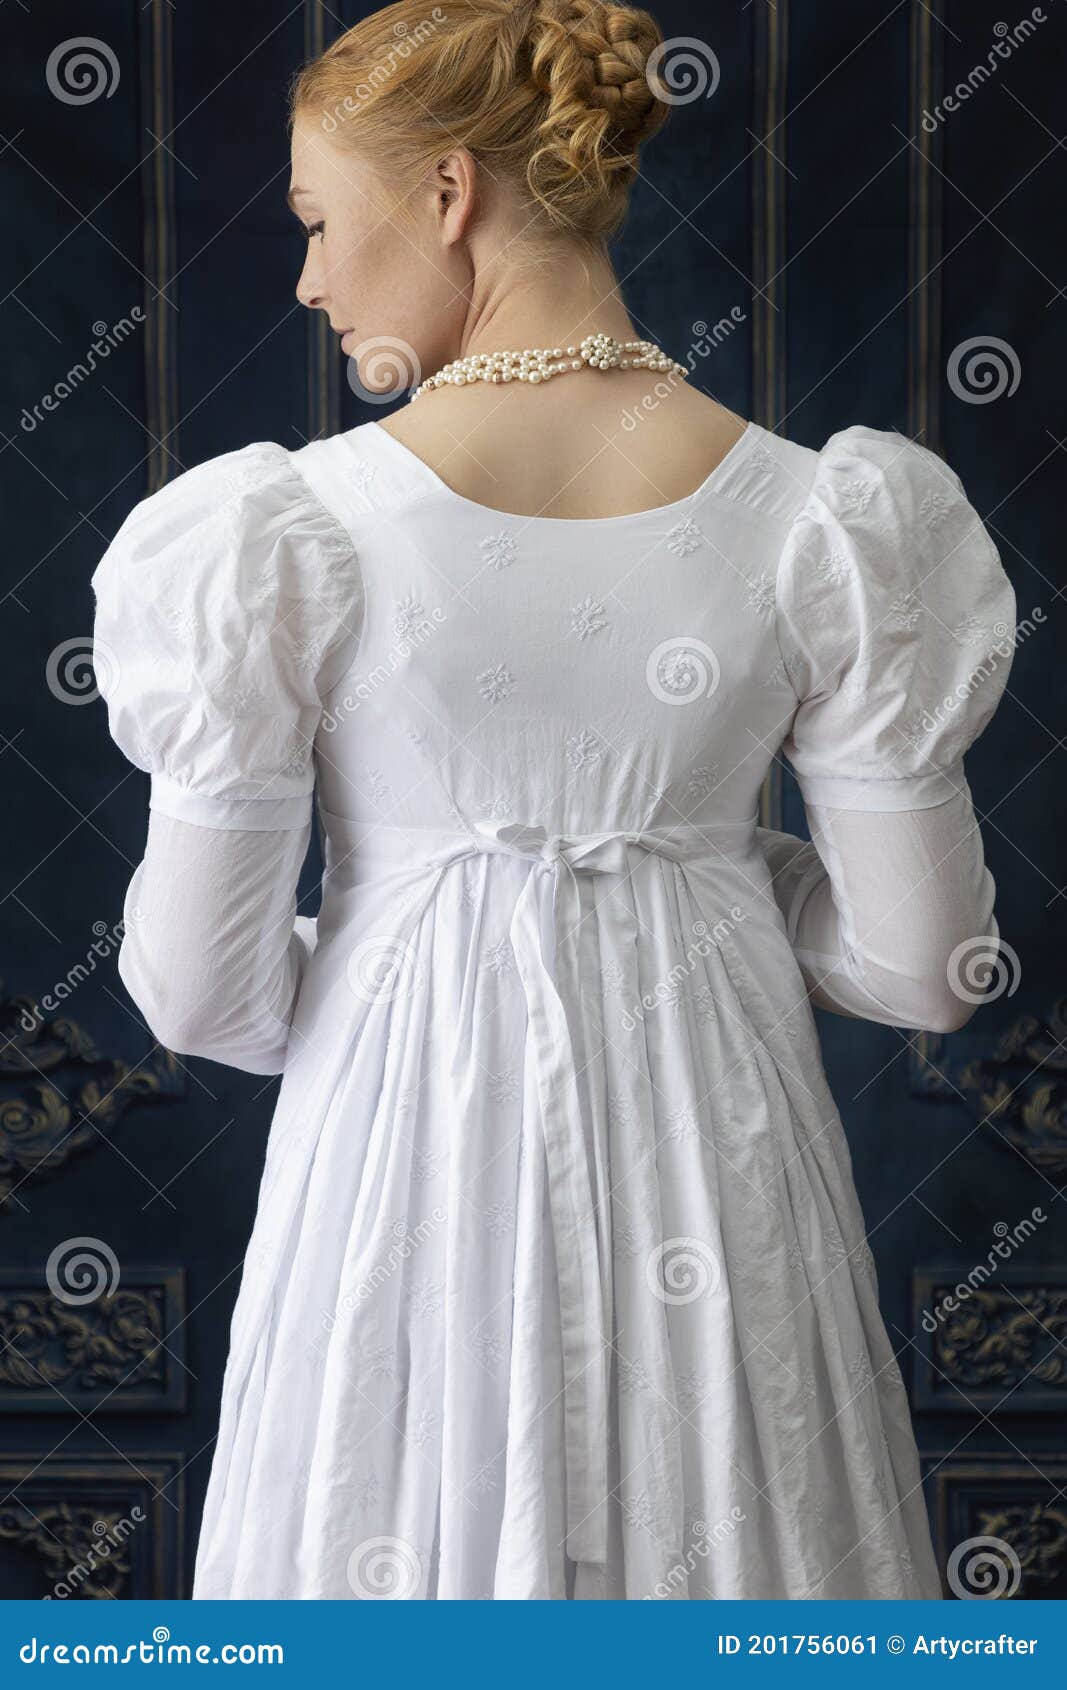 a regency woman wearing a white cotton muslin dress and standing in a room